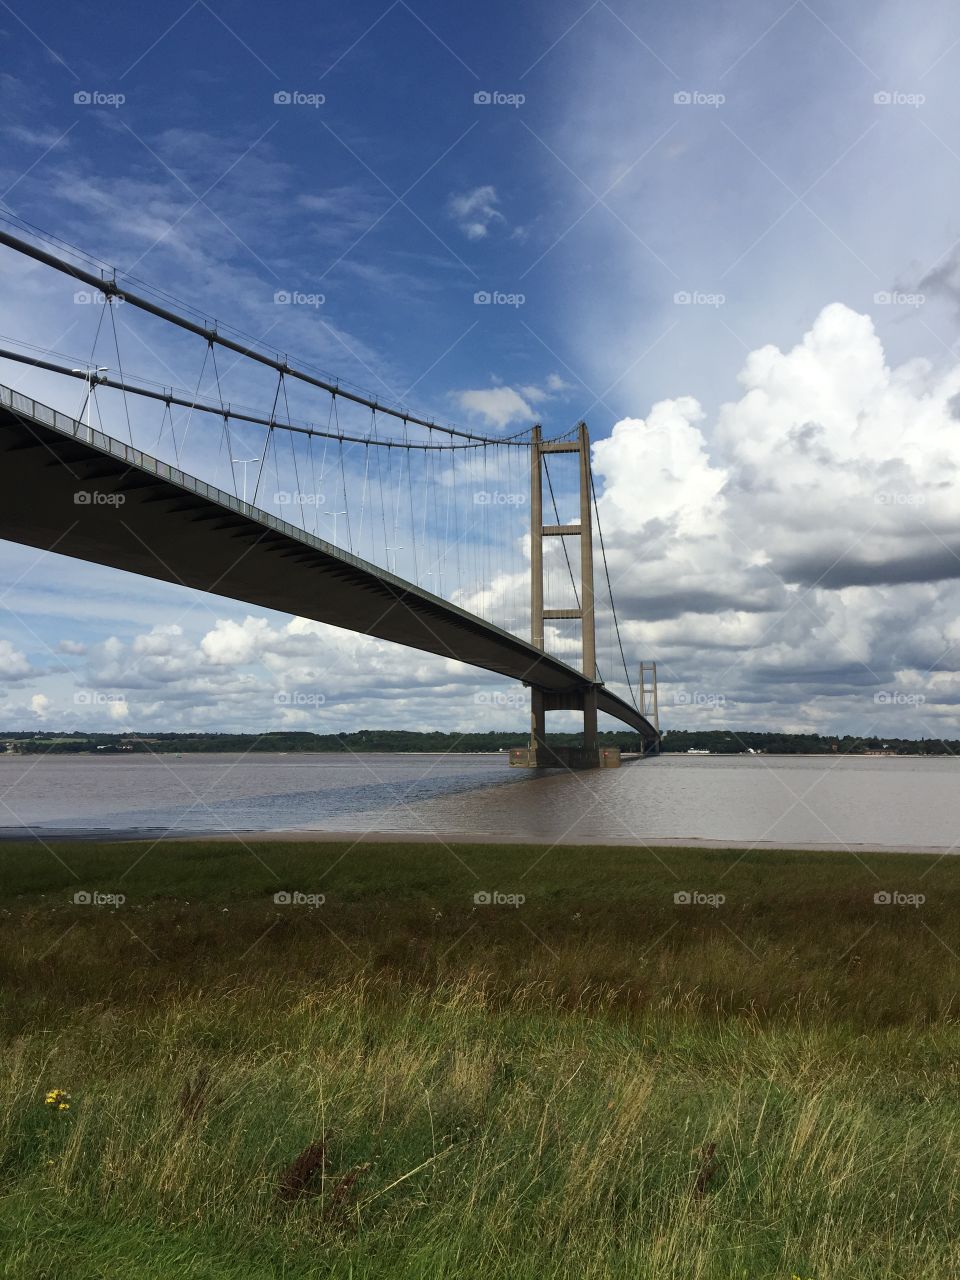 Let got to the other side (Humber bridge, Brigg side) 